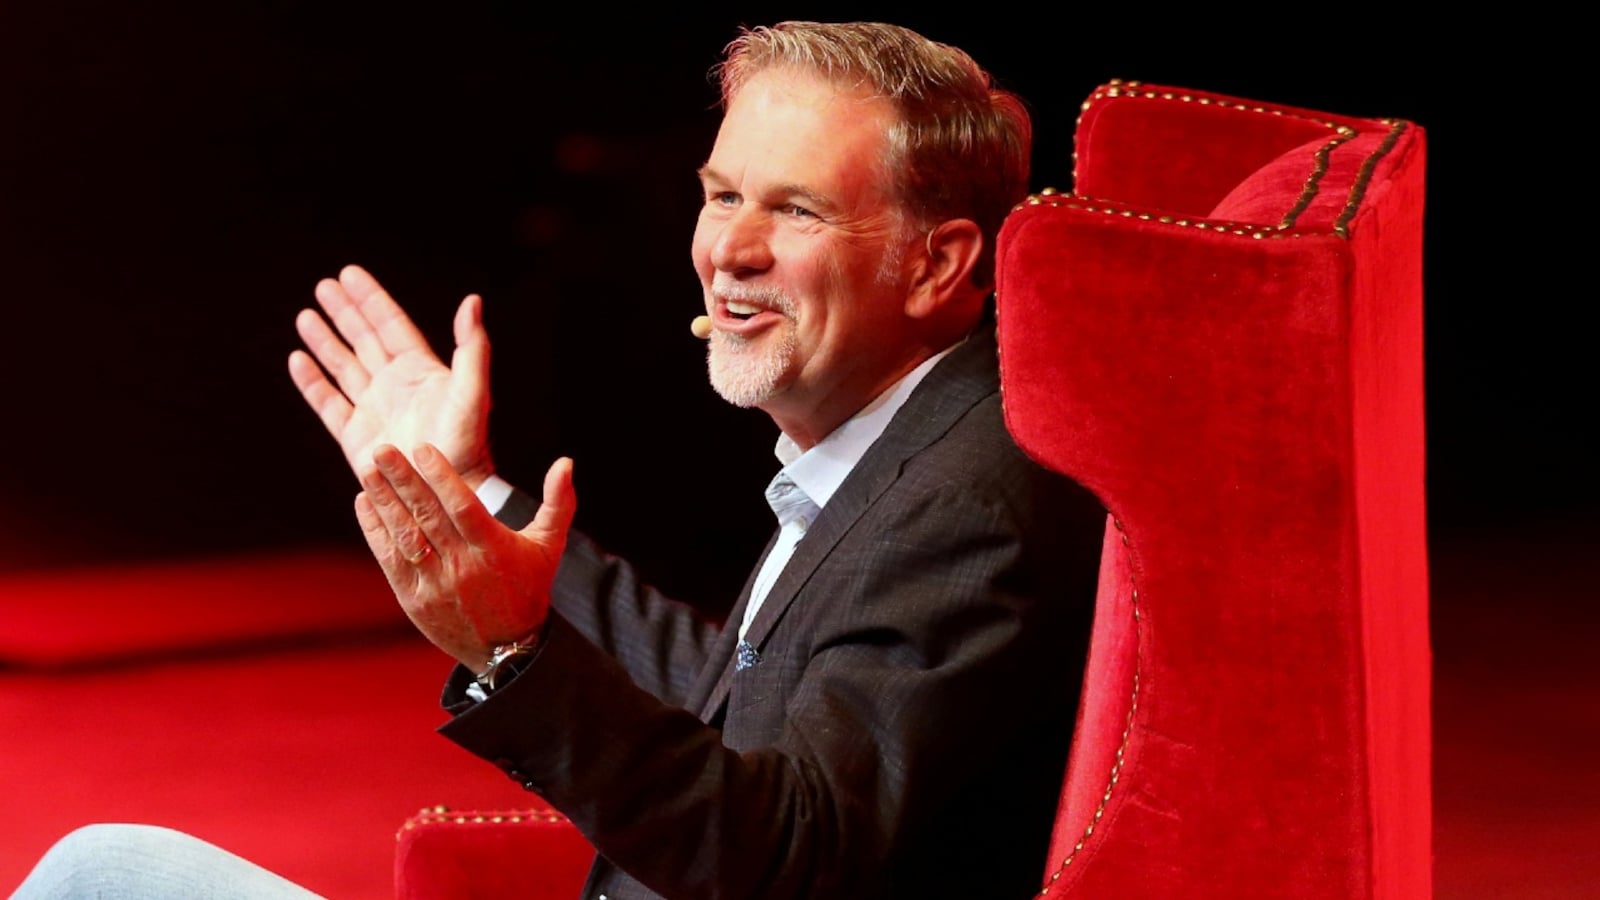 Netflix co-founder Reed Hastings steps down as CEO as company adds subscribers